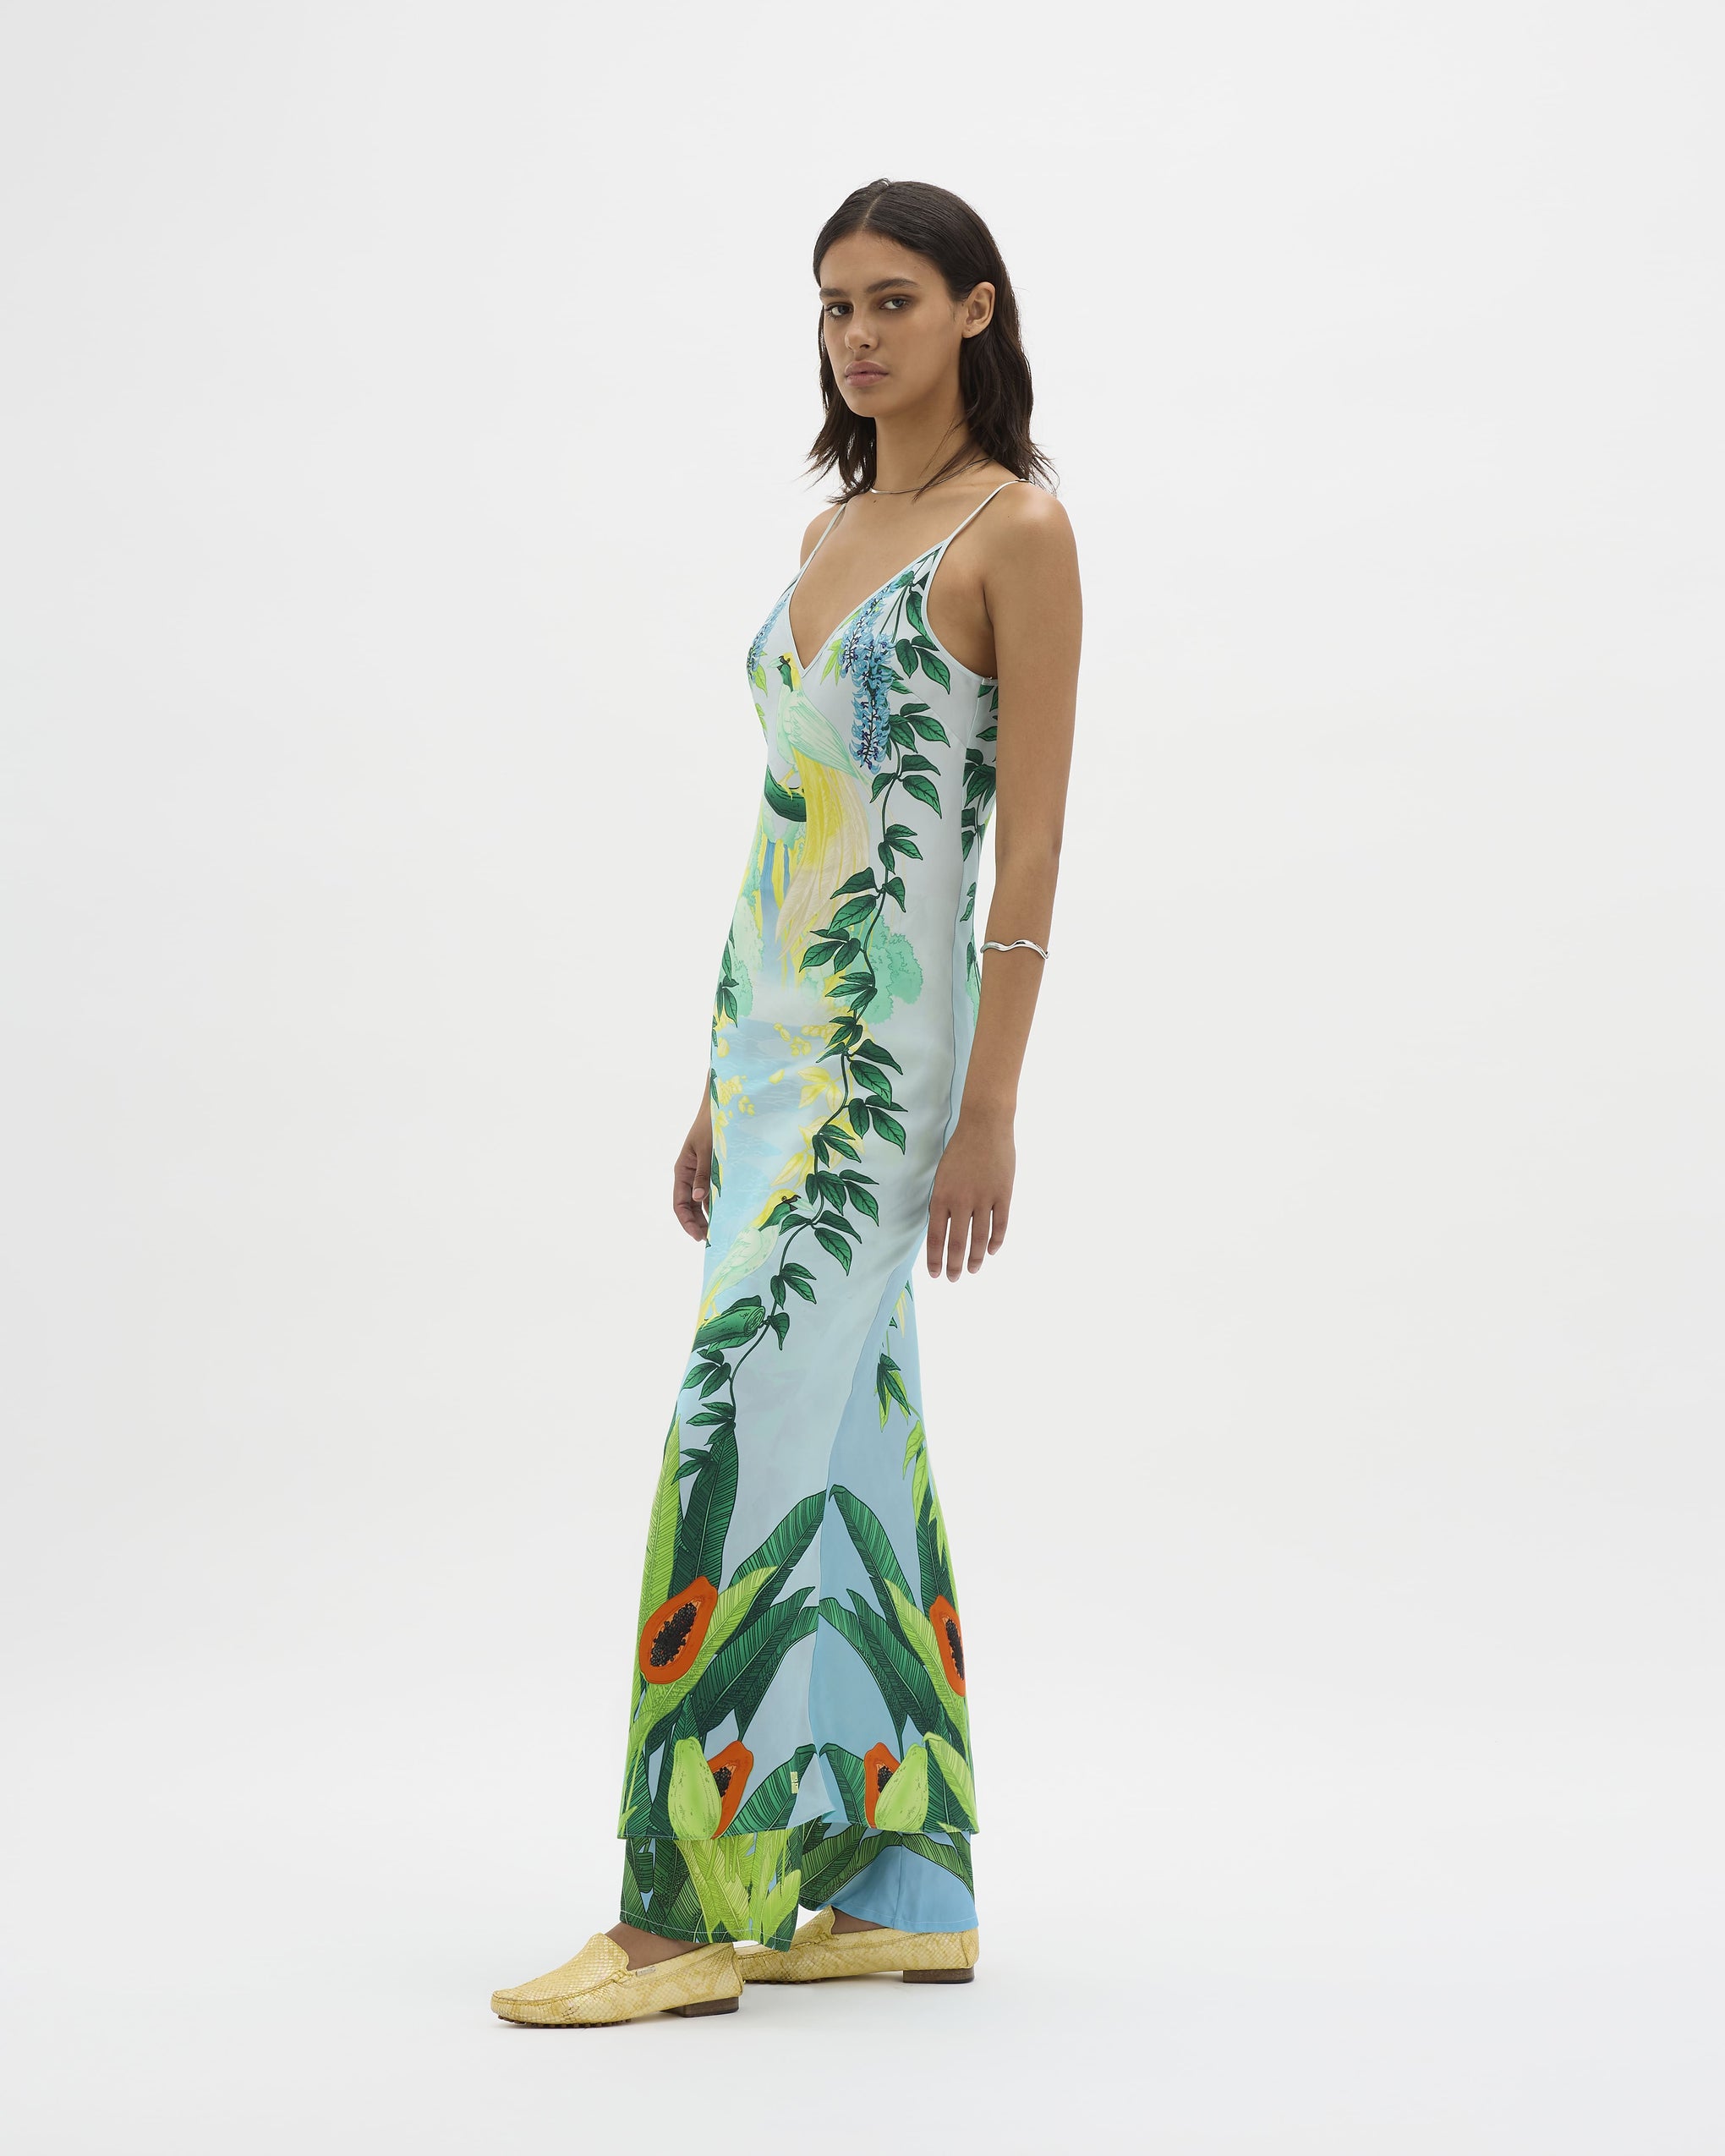 Muma World Eden Illustrated Bias Maxi Dress in Blue available at The New Trend Australia.